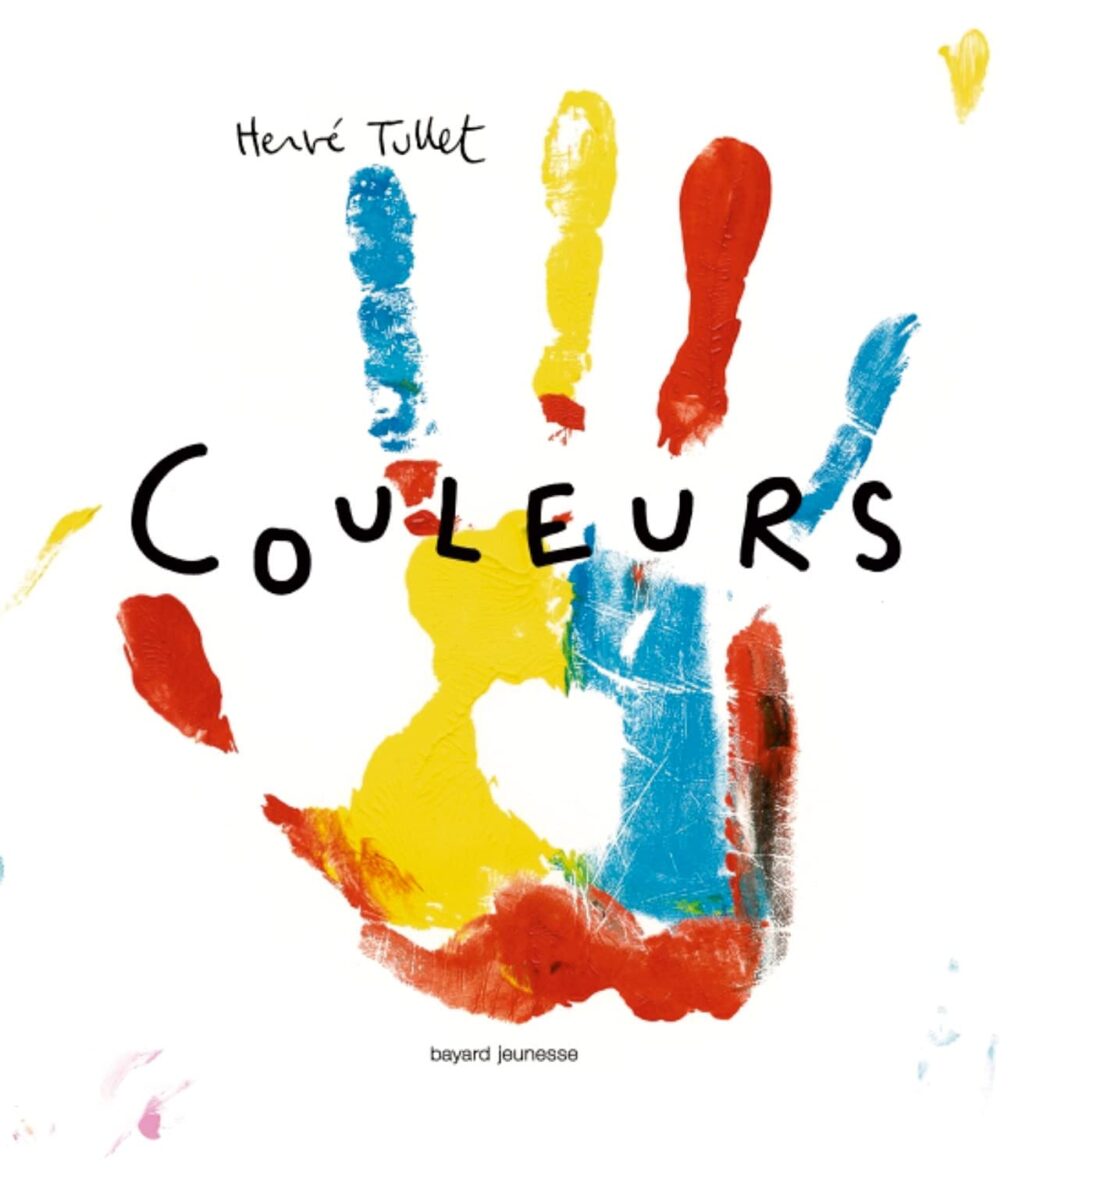 Couleurs Herve Tullet – Editions Bayard